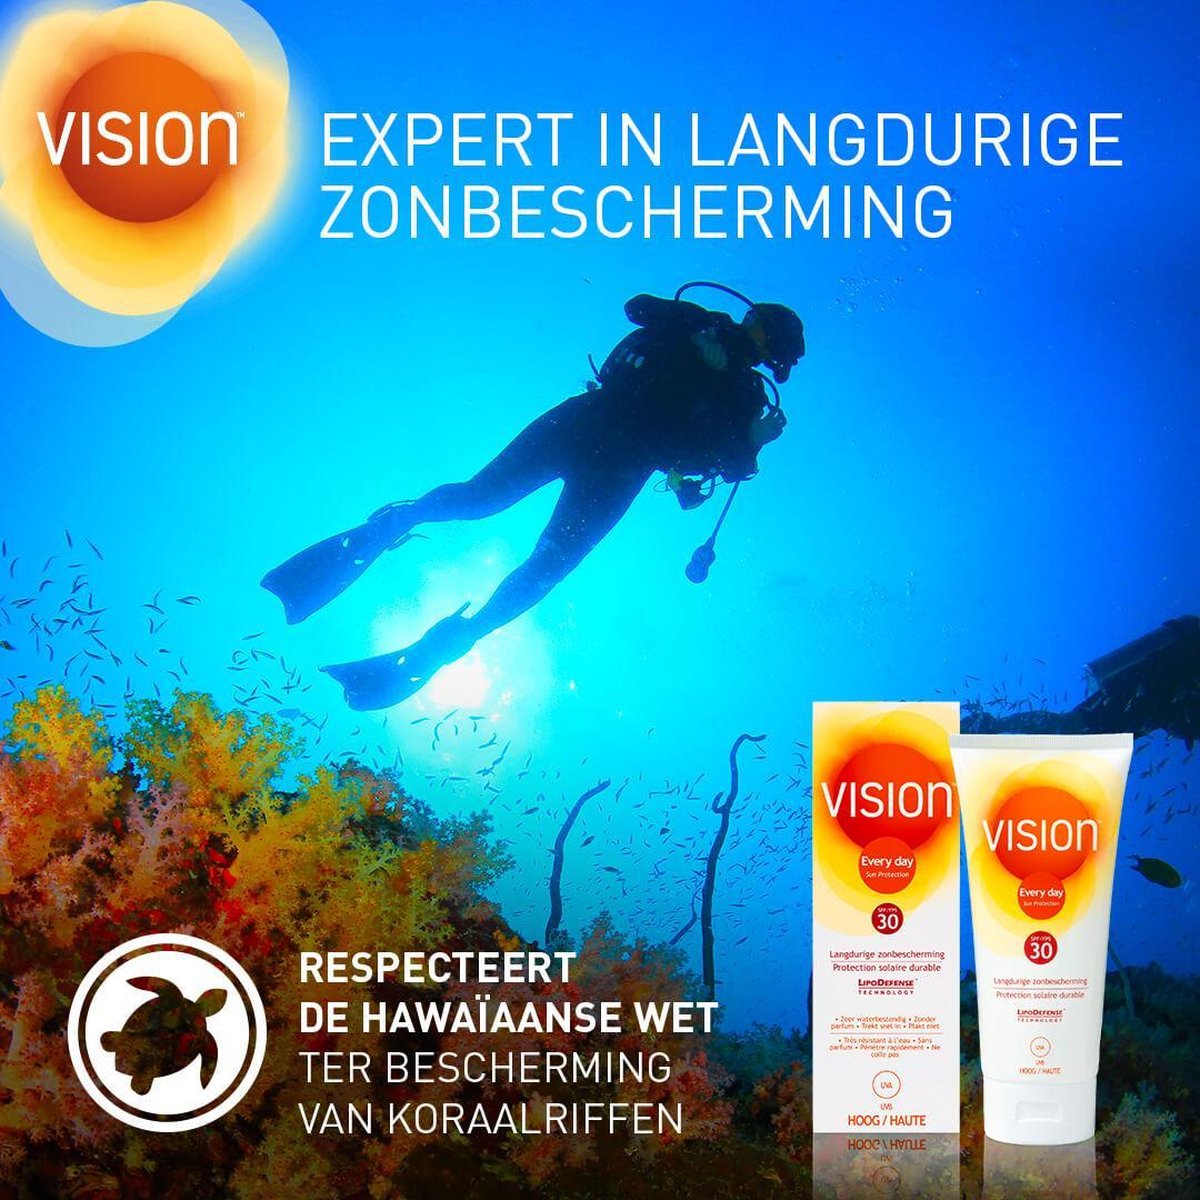 Vision Every Day Sun Protection - Zonnebrand - SPF 50 180 ml |